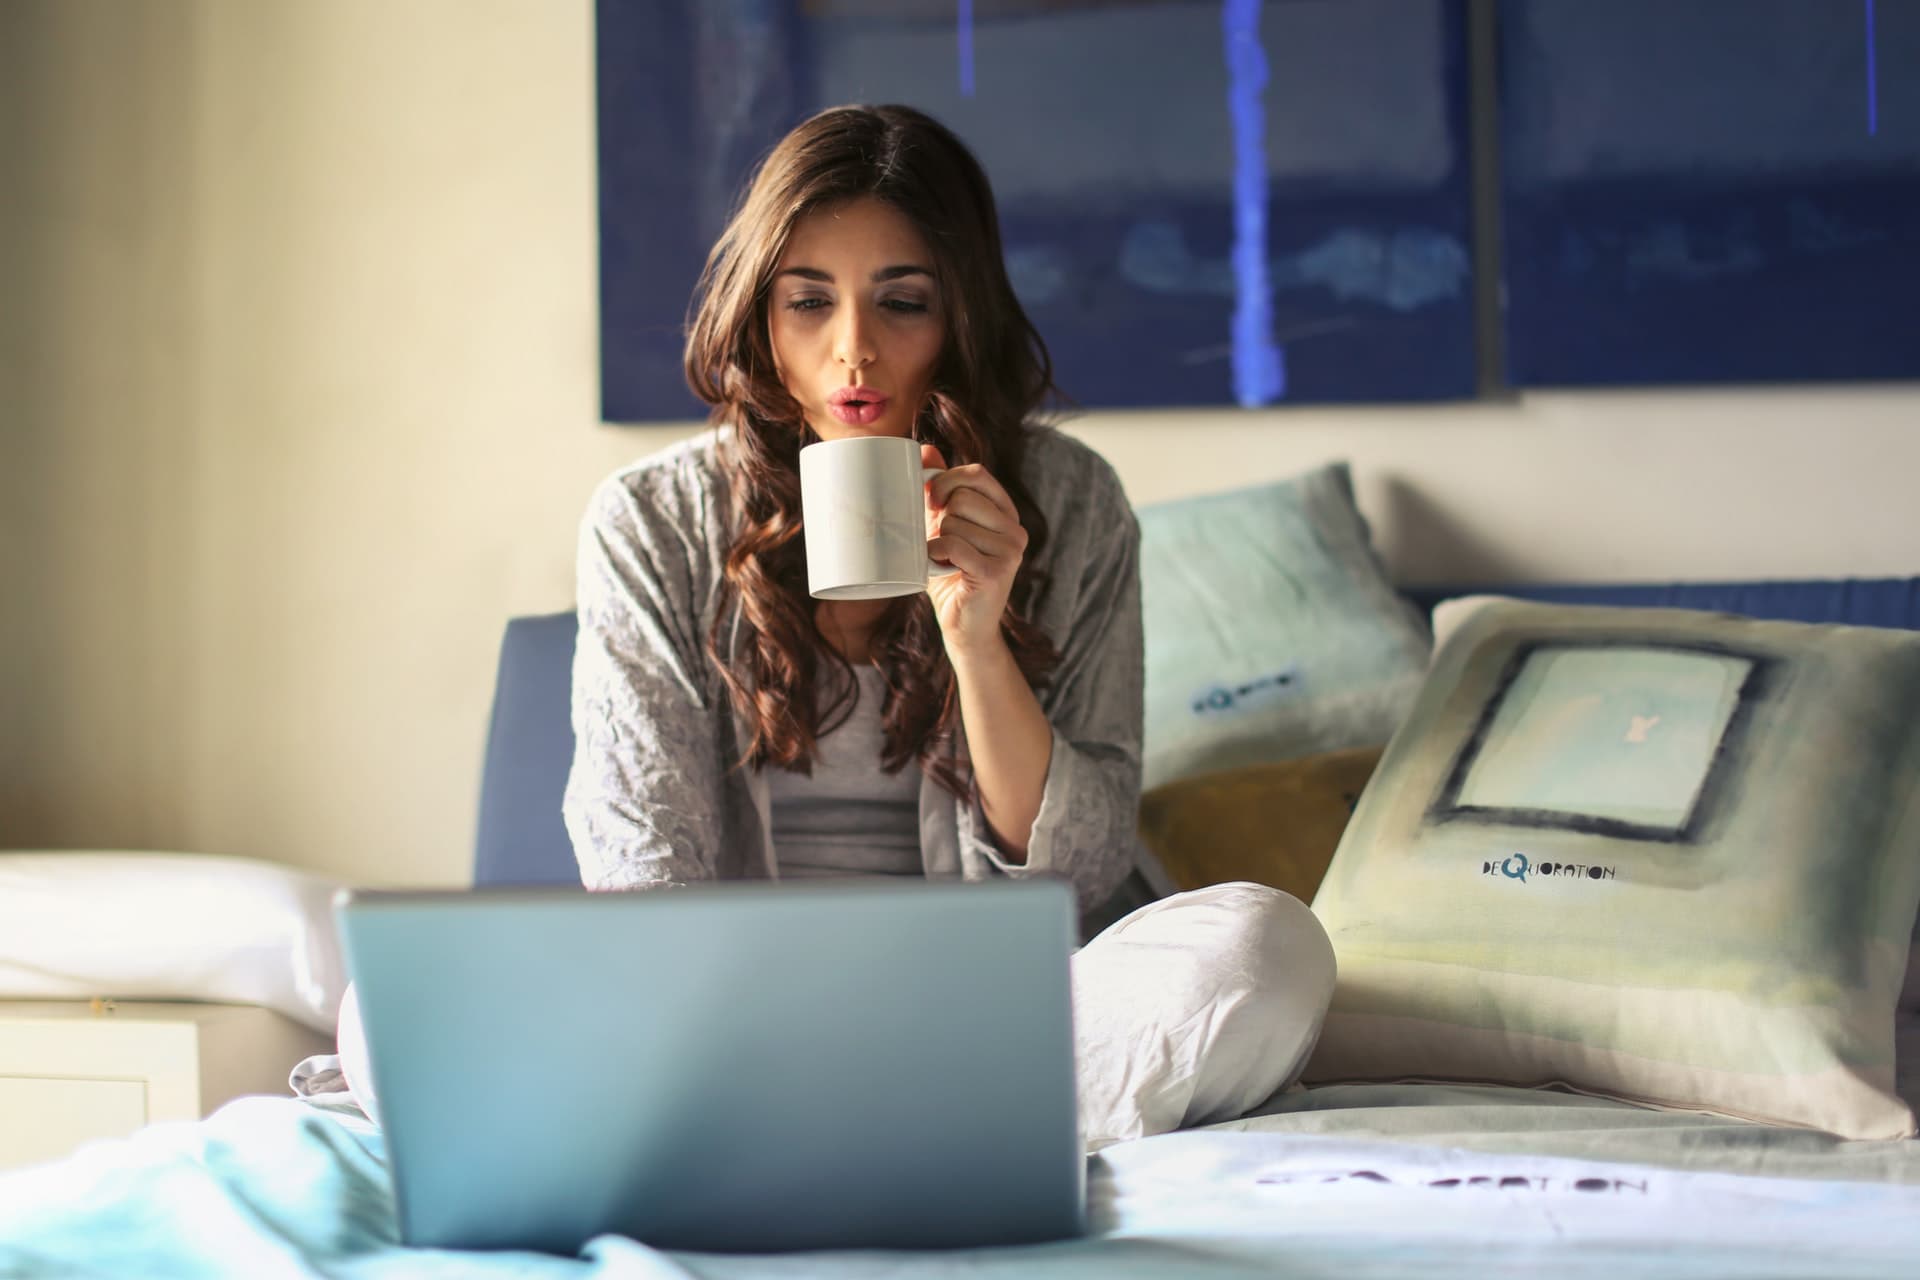 This image shows a woman drinking coffee while looking at her different lending options through our student loan calculator.